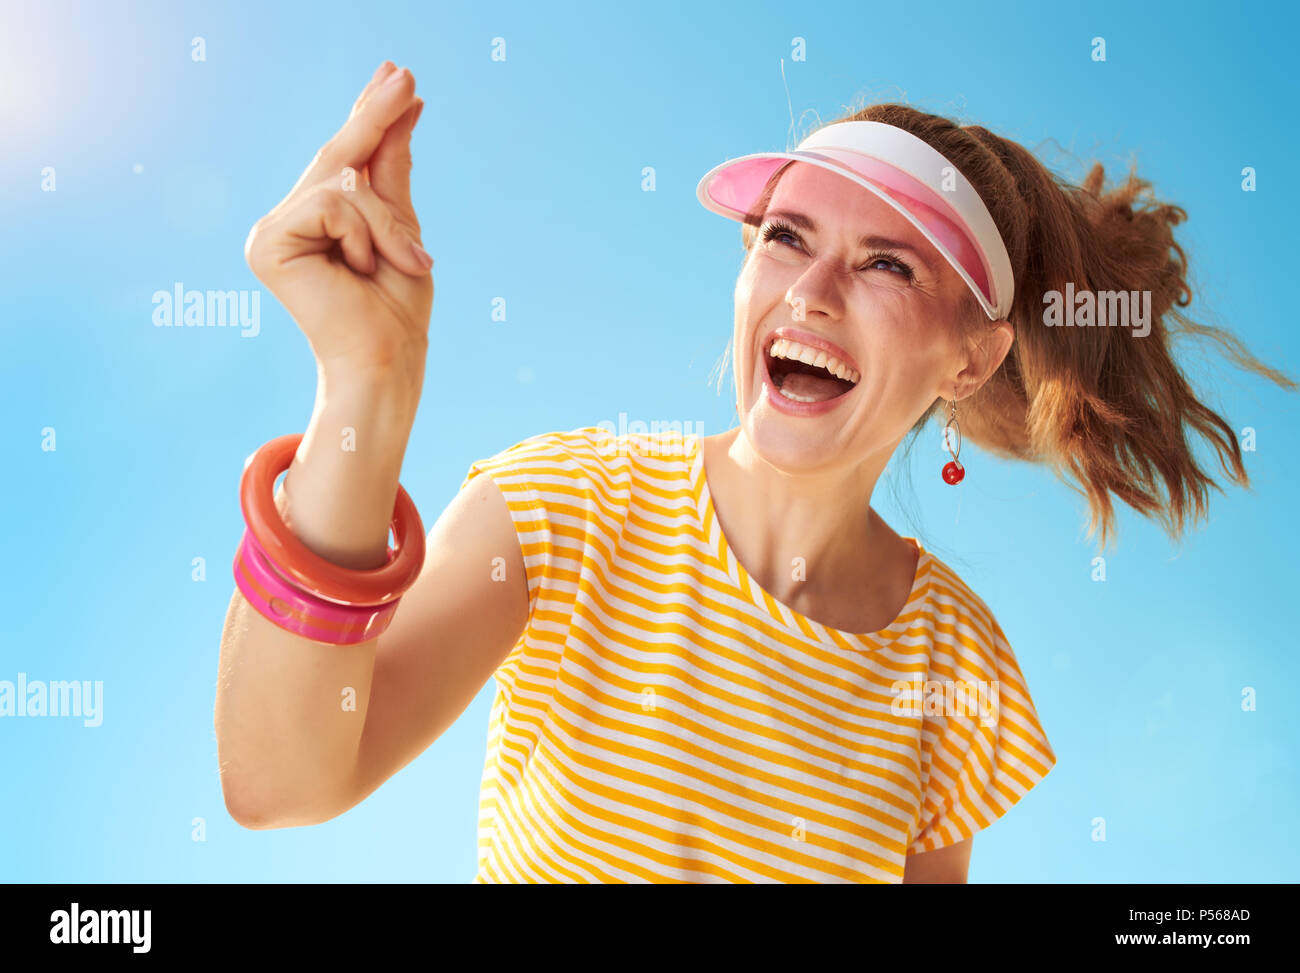 smiling young woman in yellow shirt against blue sky fingers snapping Stock Photo